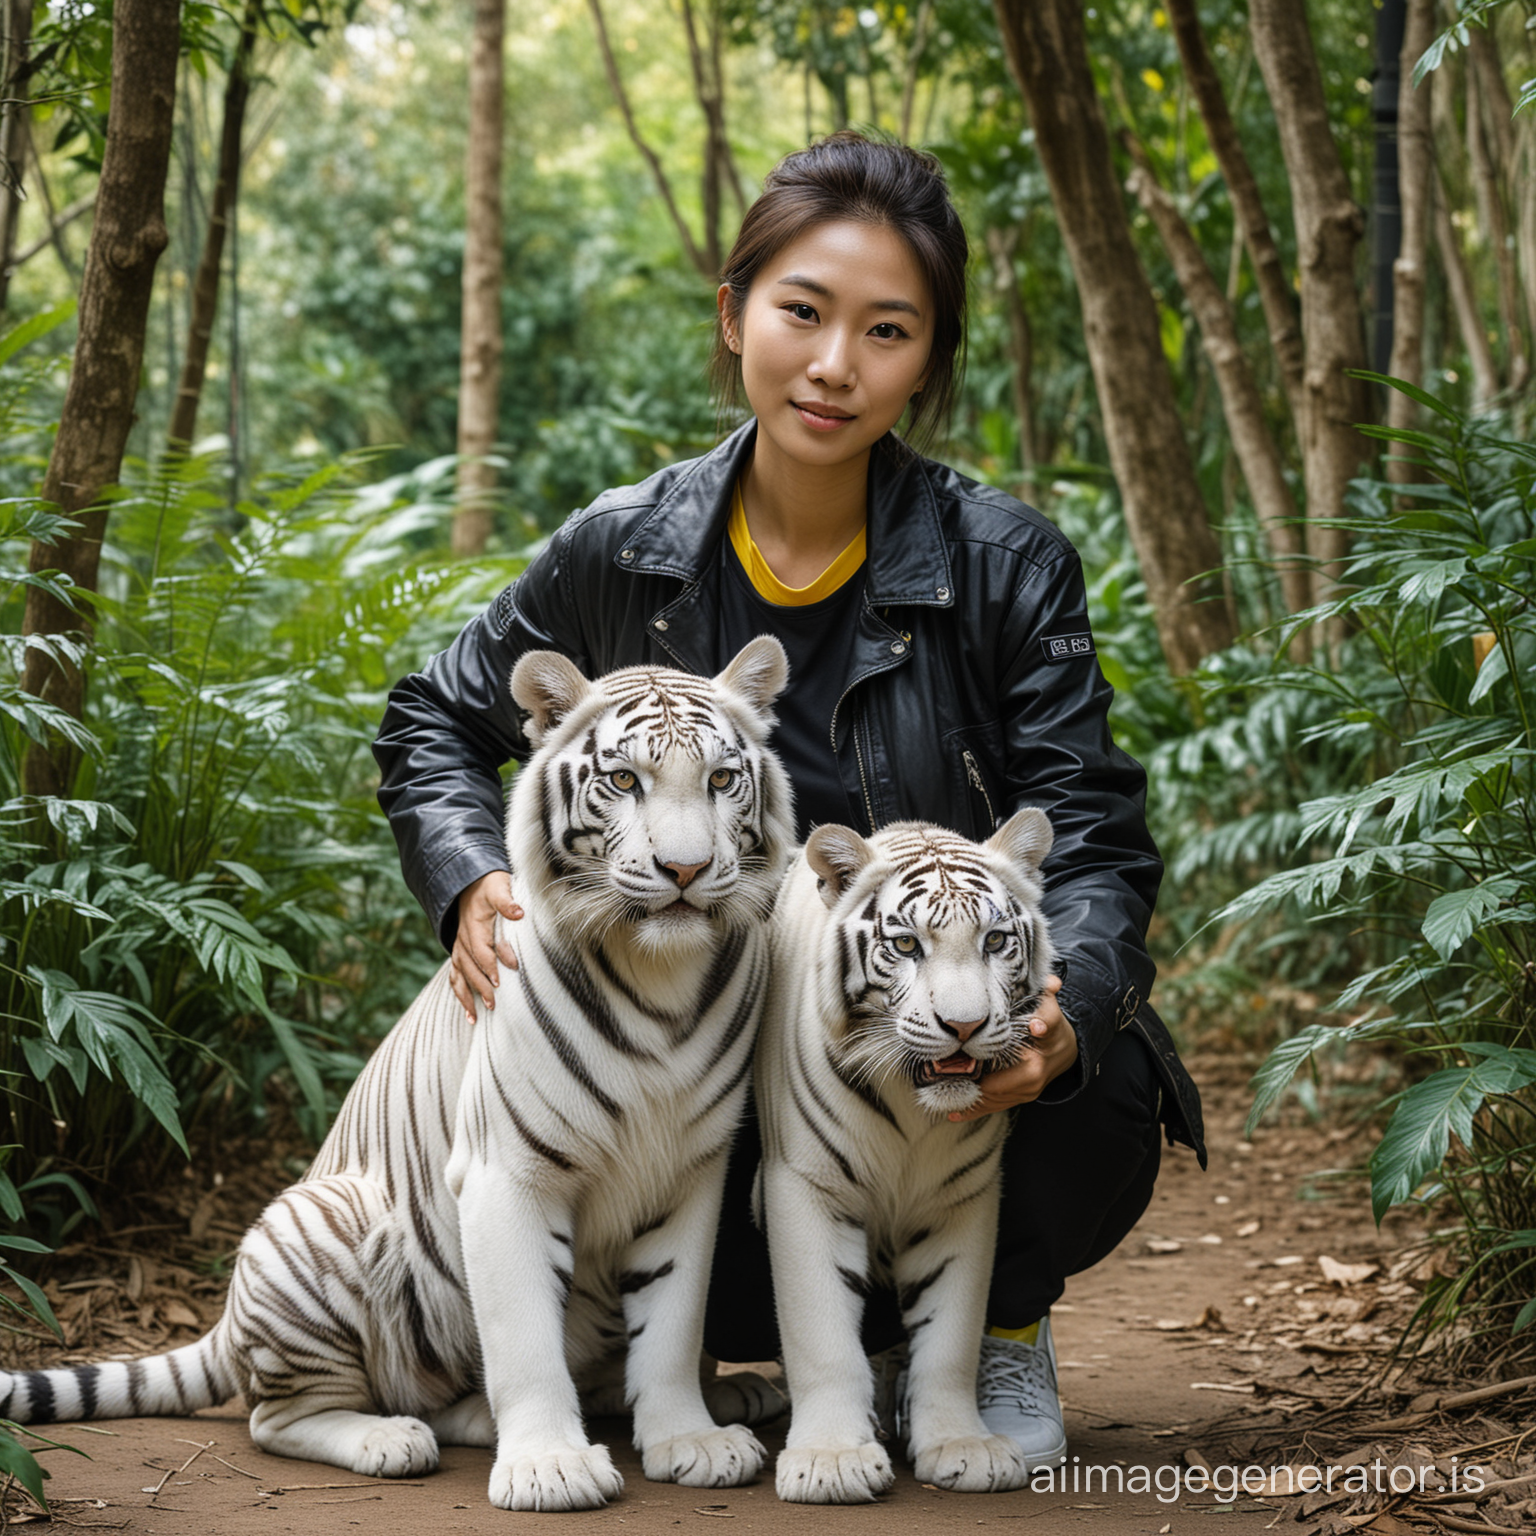 portrait of asian woman. The individual was wearing a black jacket with yellow sleeves, as well as black trousers and gray sneakers. He squatted down and hugged a little white tiger cub in a forest or park. The white tiger looked calm and peaceful, with clean fur and wide-open eyes. The background consists of large trees and green plants.